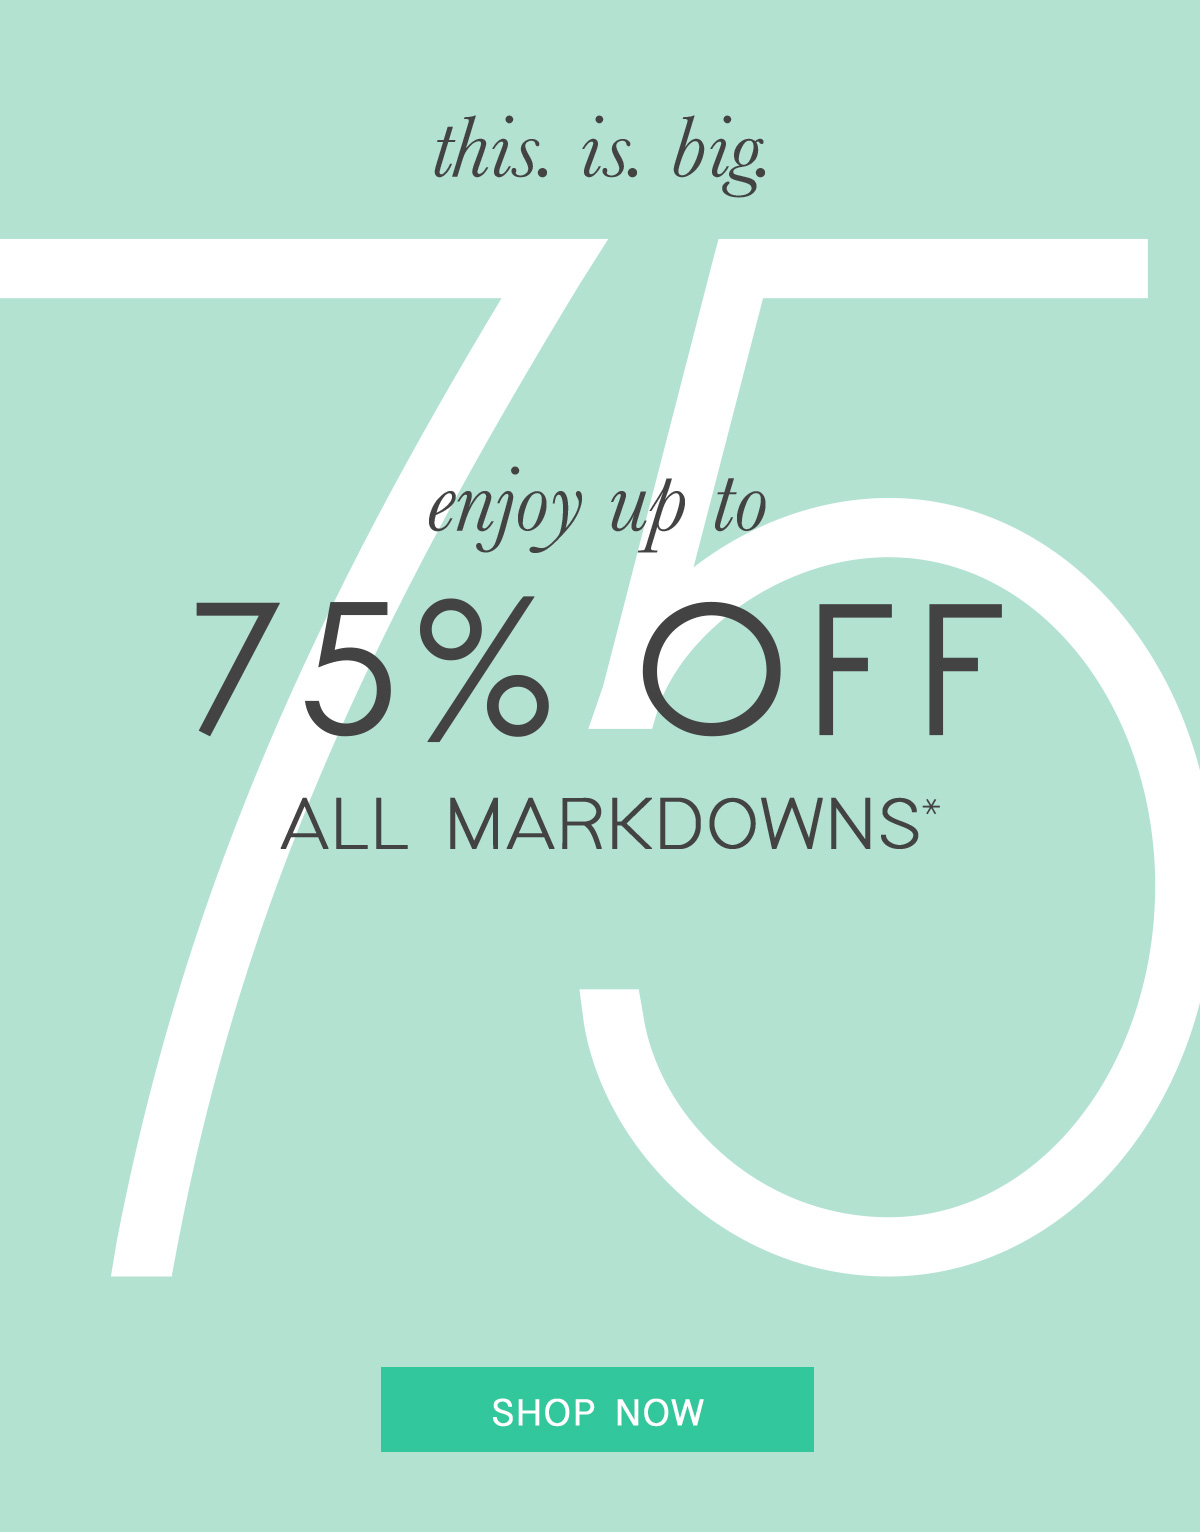 this. is. big. enjoy up to  75% OFF all markdowns* Shop Now